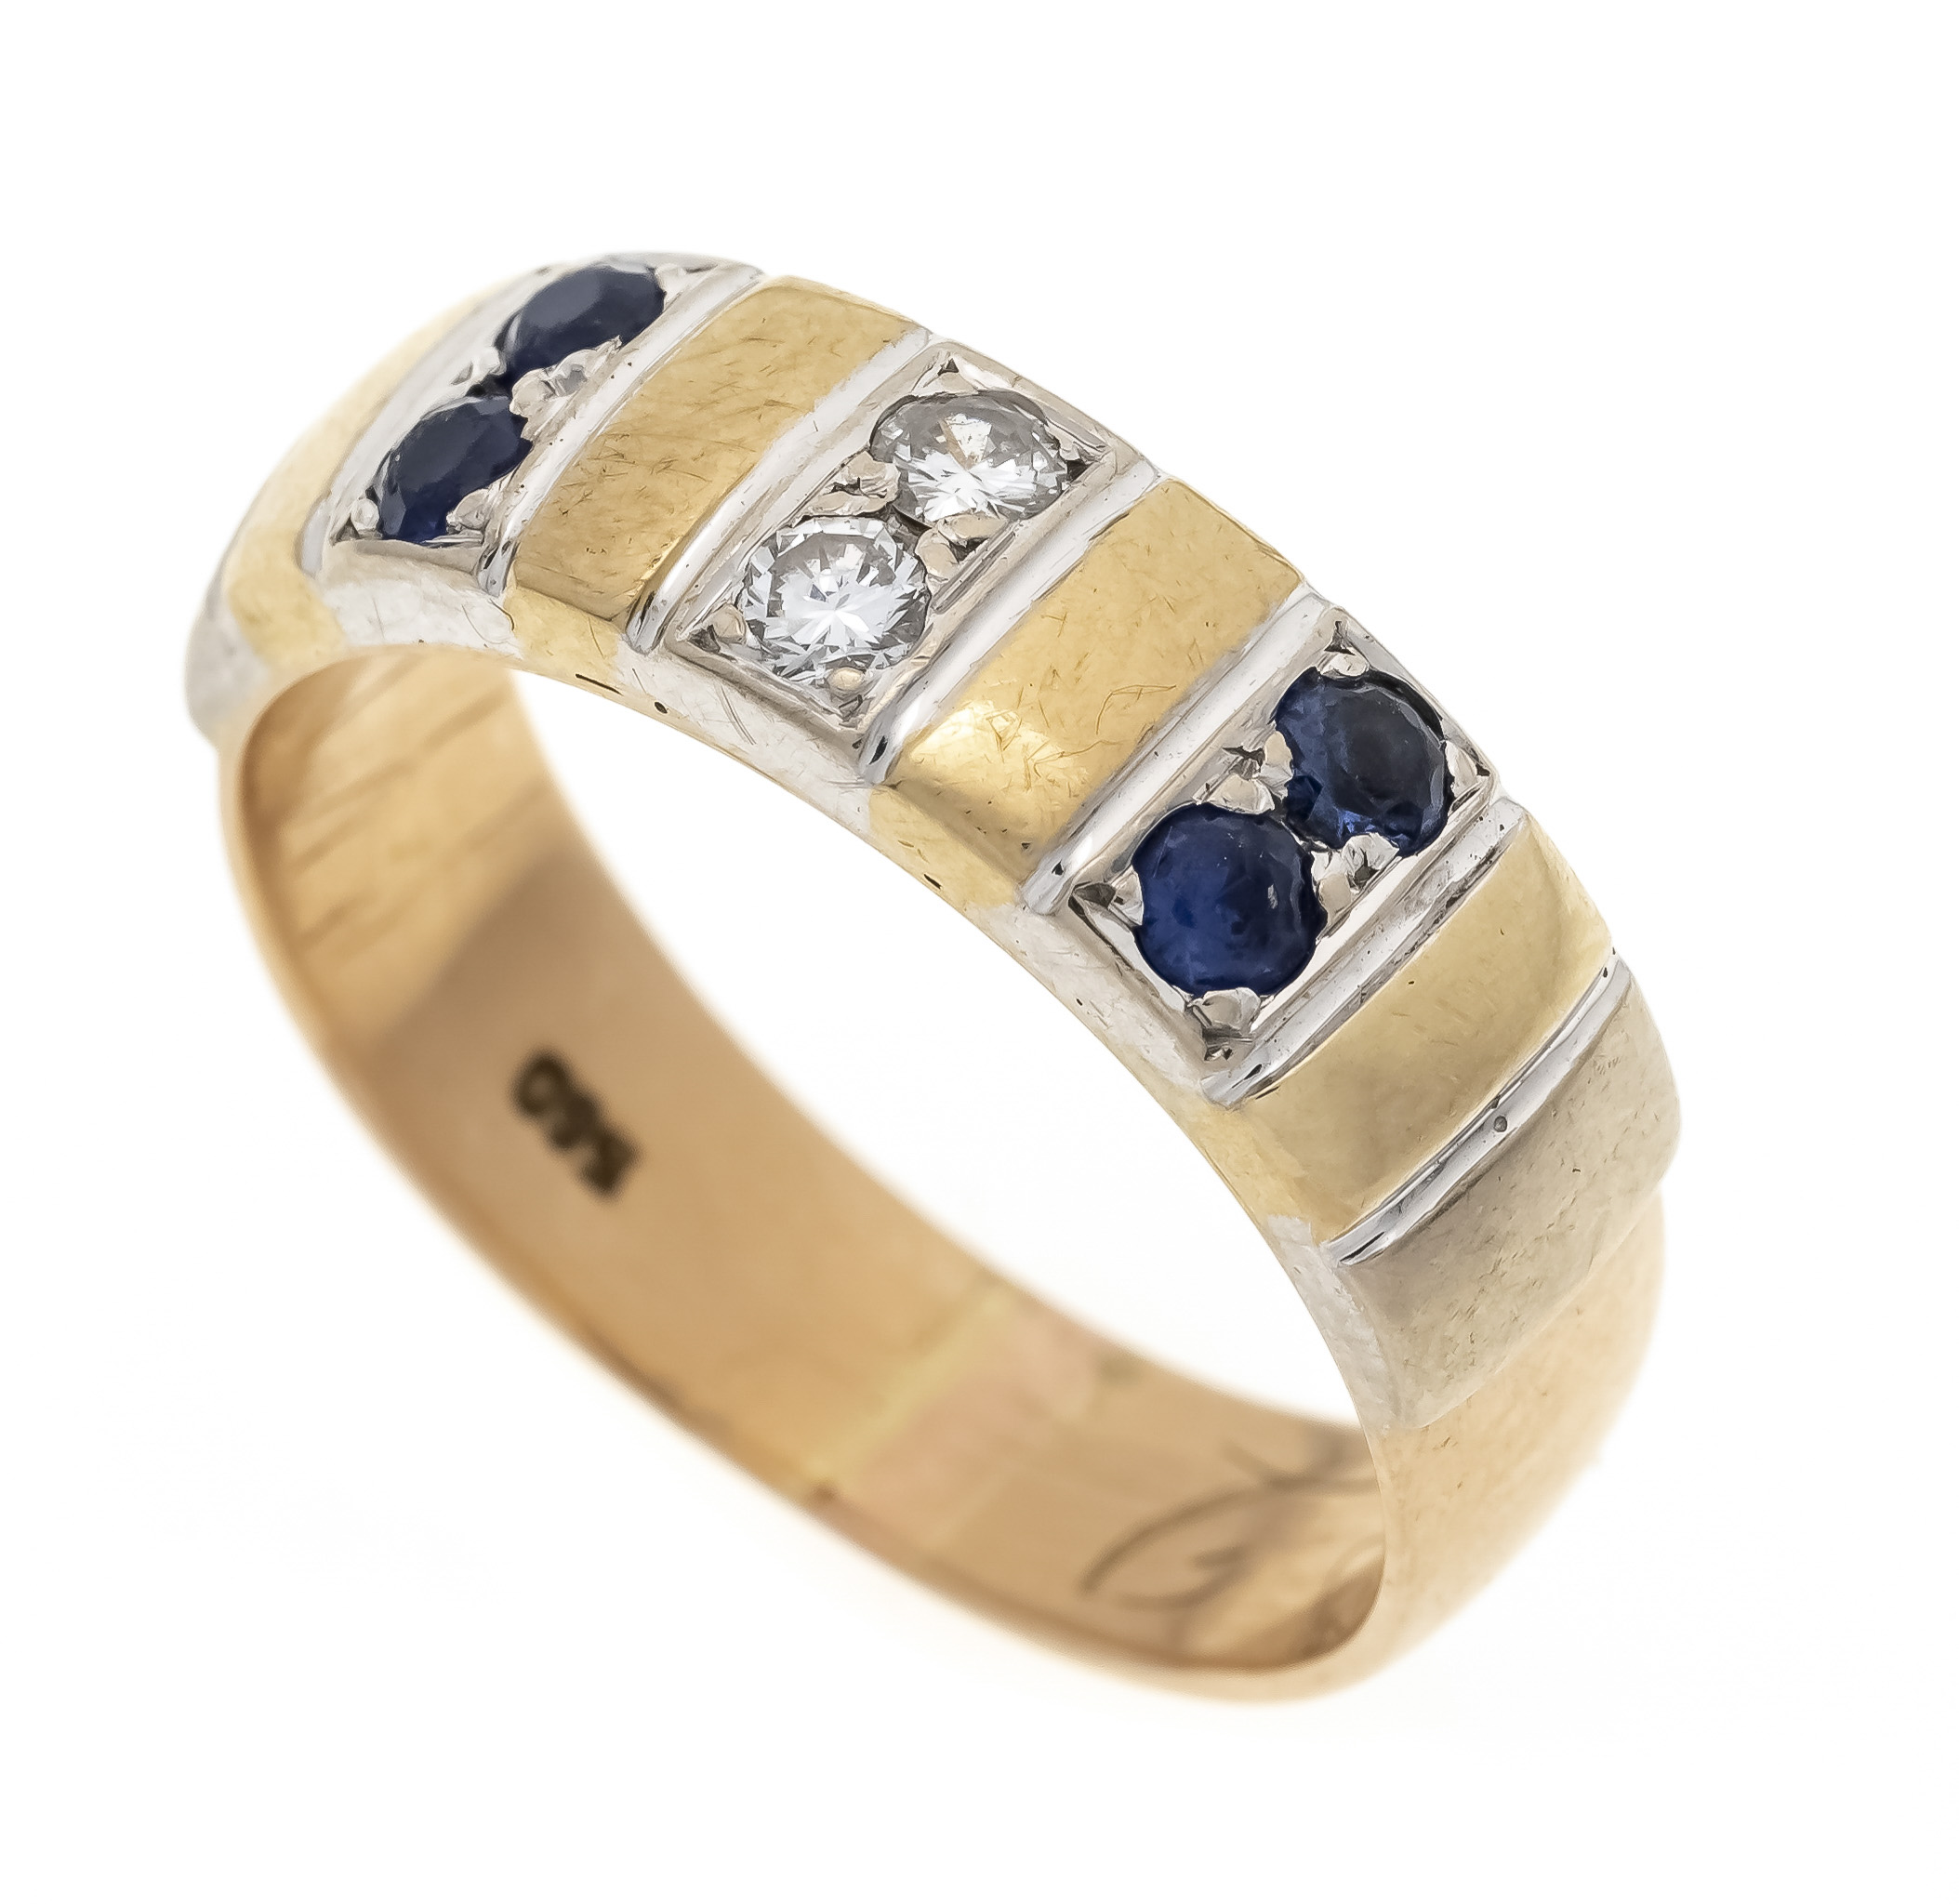 Sapphire and brilliant-cut diamond ring GG/WG 560/000 with 4 round faceted sapphires 2.3 mm darker